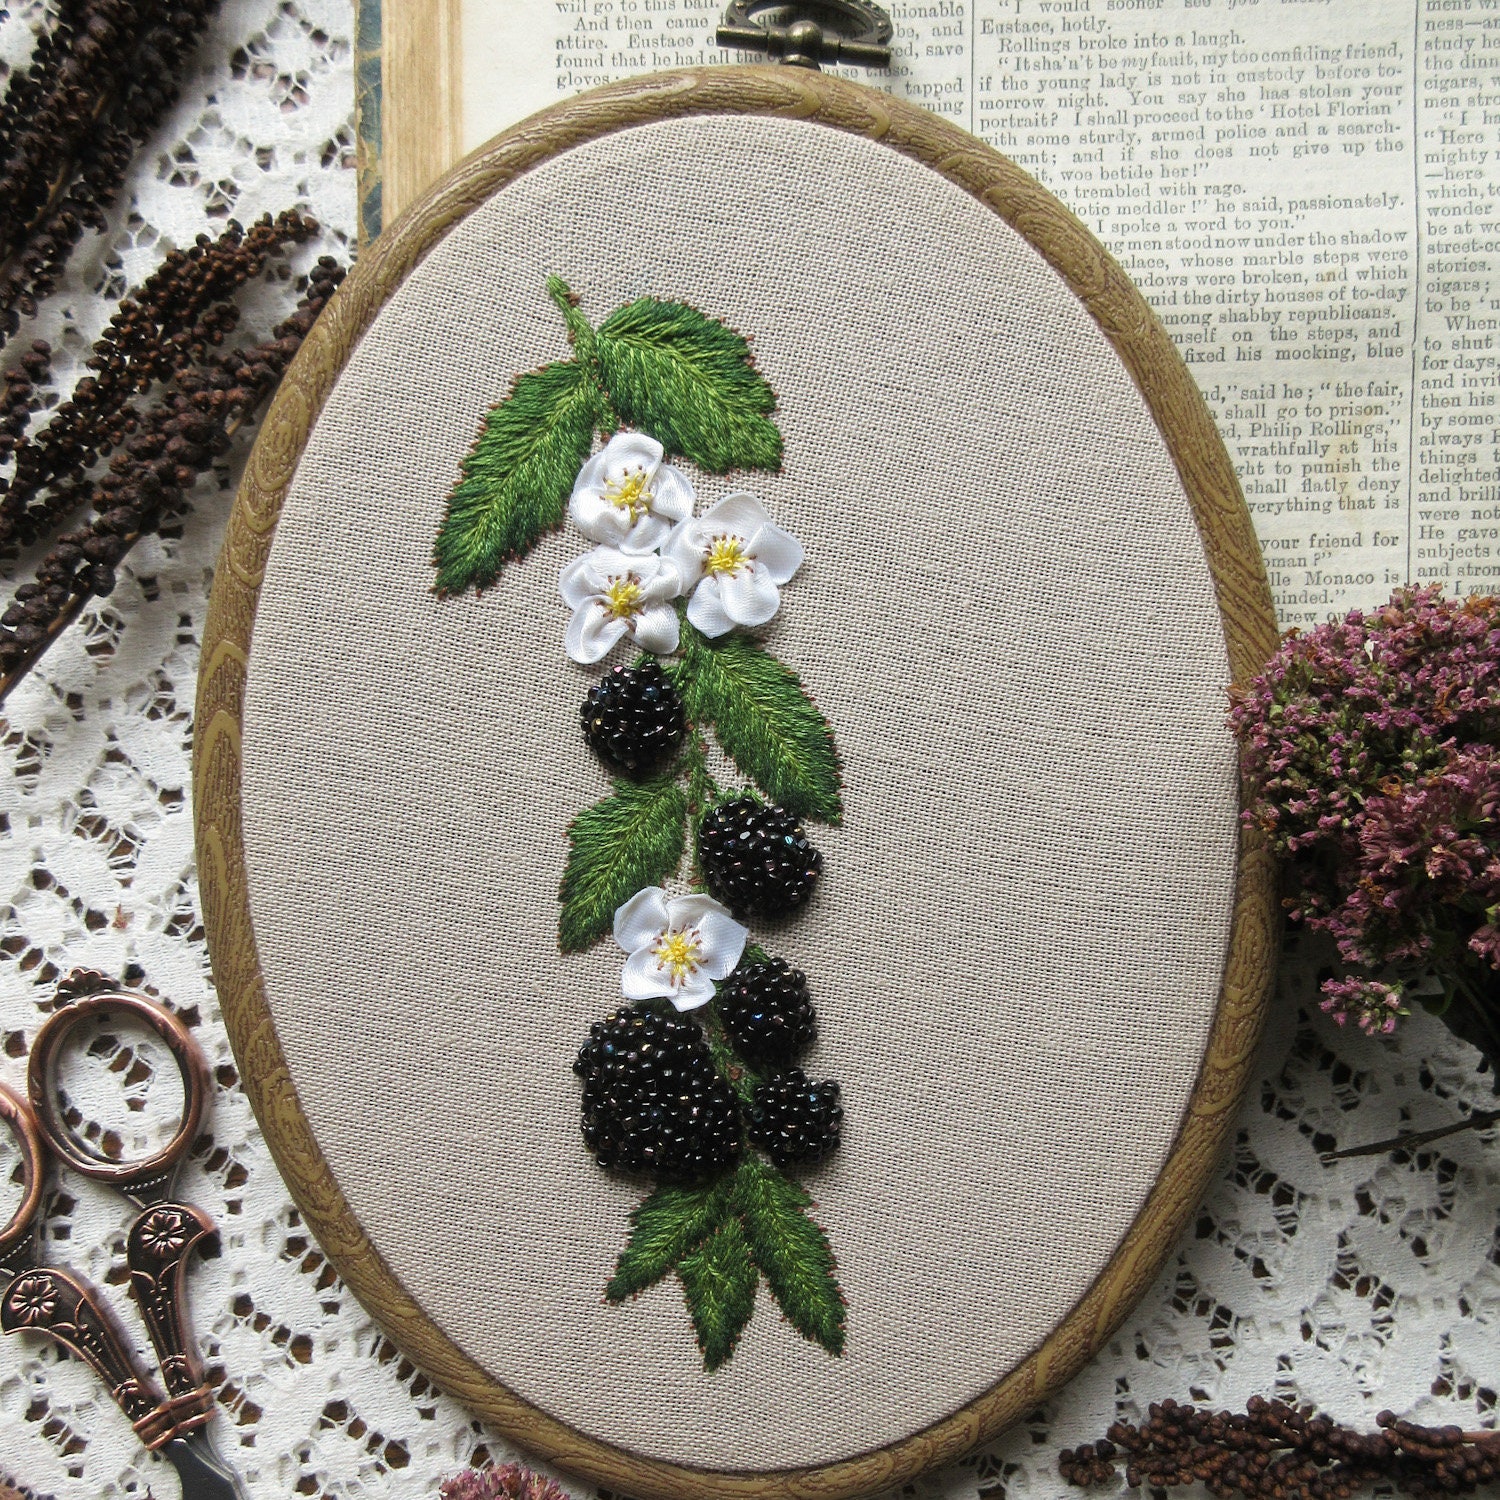 Embroidery Hoops and Cross Stitch Hoops by Celley